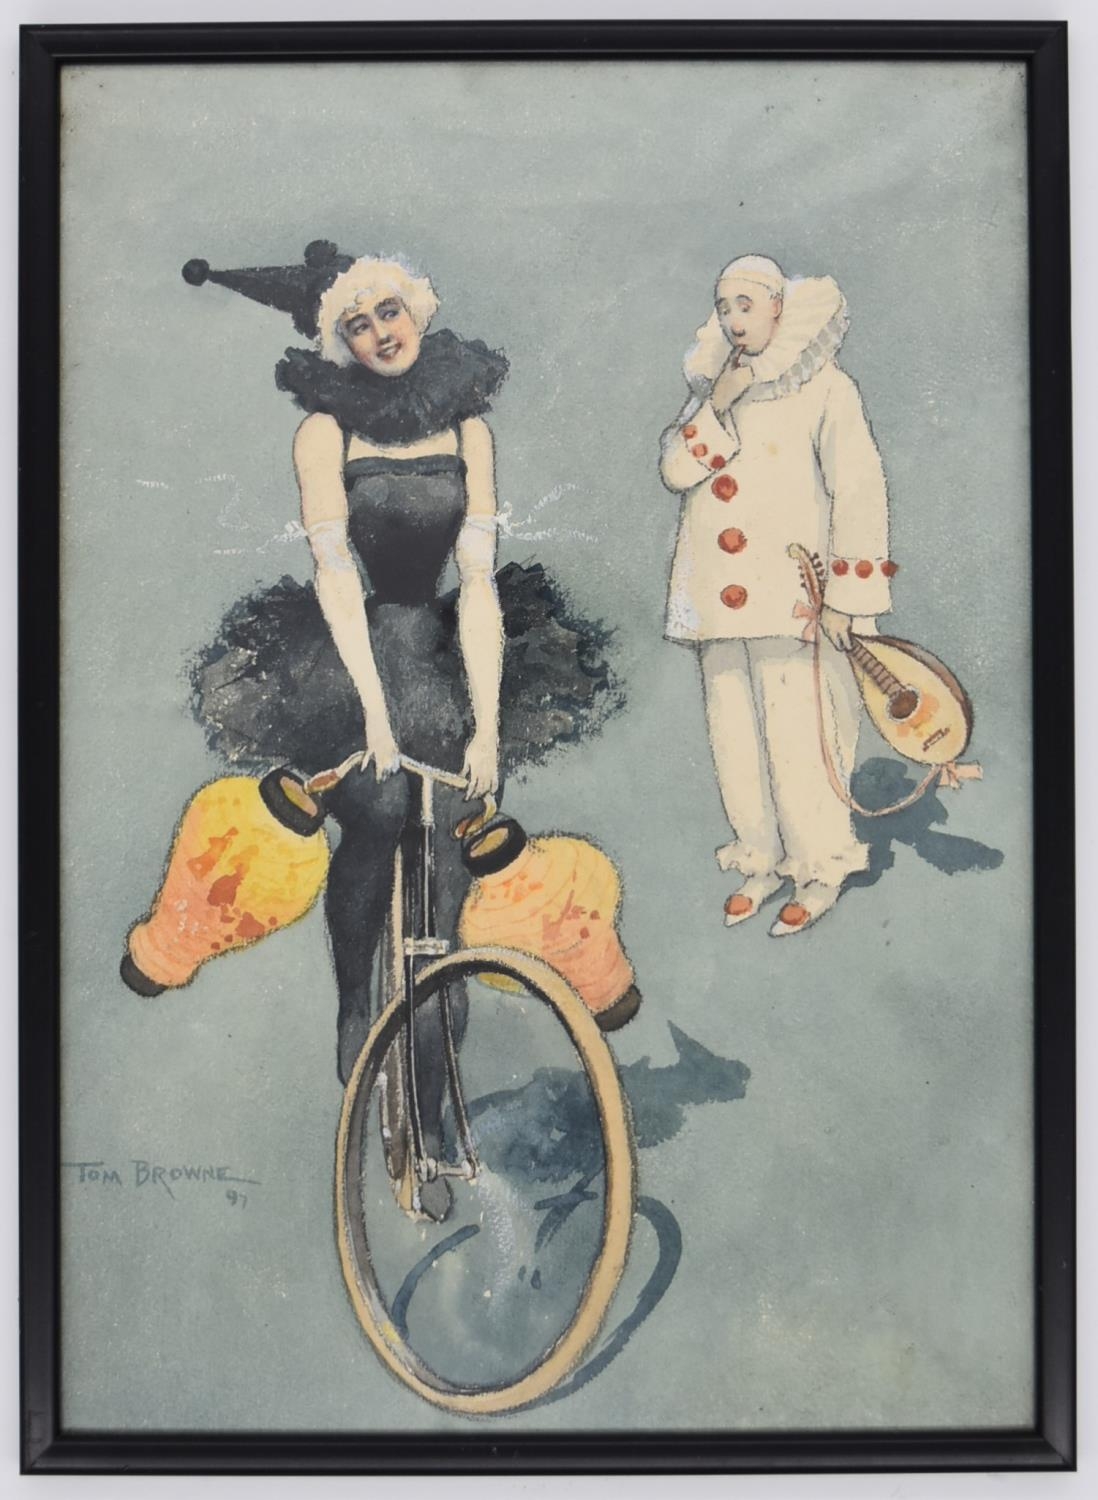 Tom Browne (1870 - 1910; British), Dancer riding bike with male clown holding an instrument, - Image 2 of 5